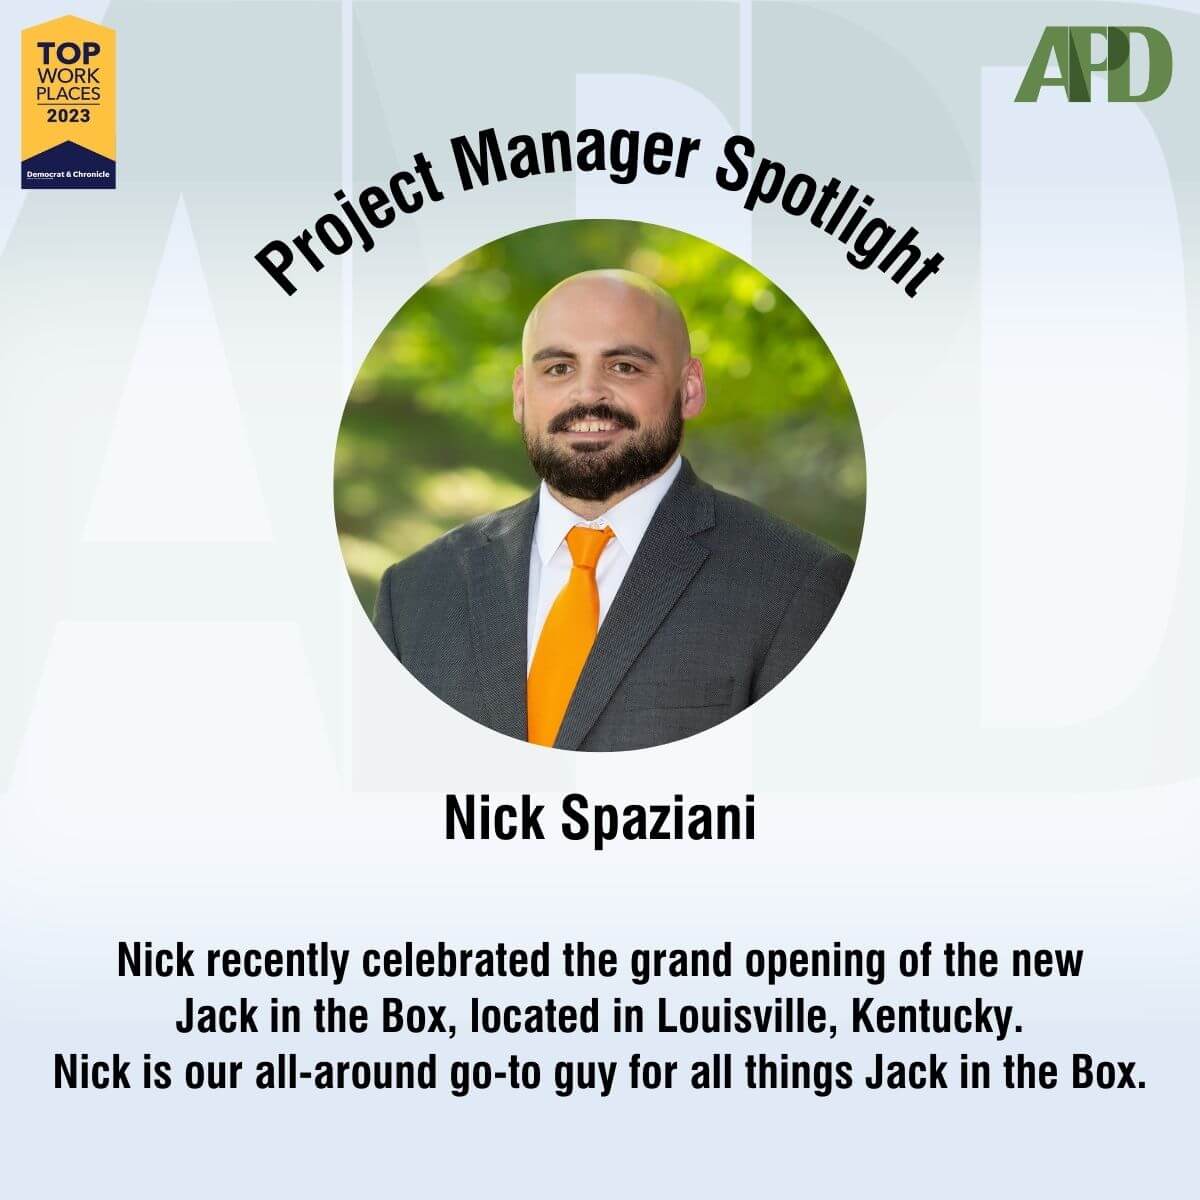 Project Manager Spotlight featuring Nick Spaziani and Jack in the Box